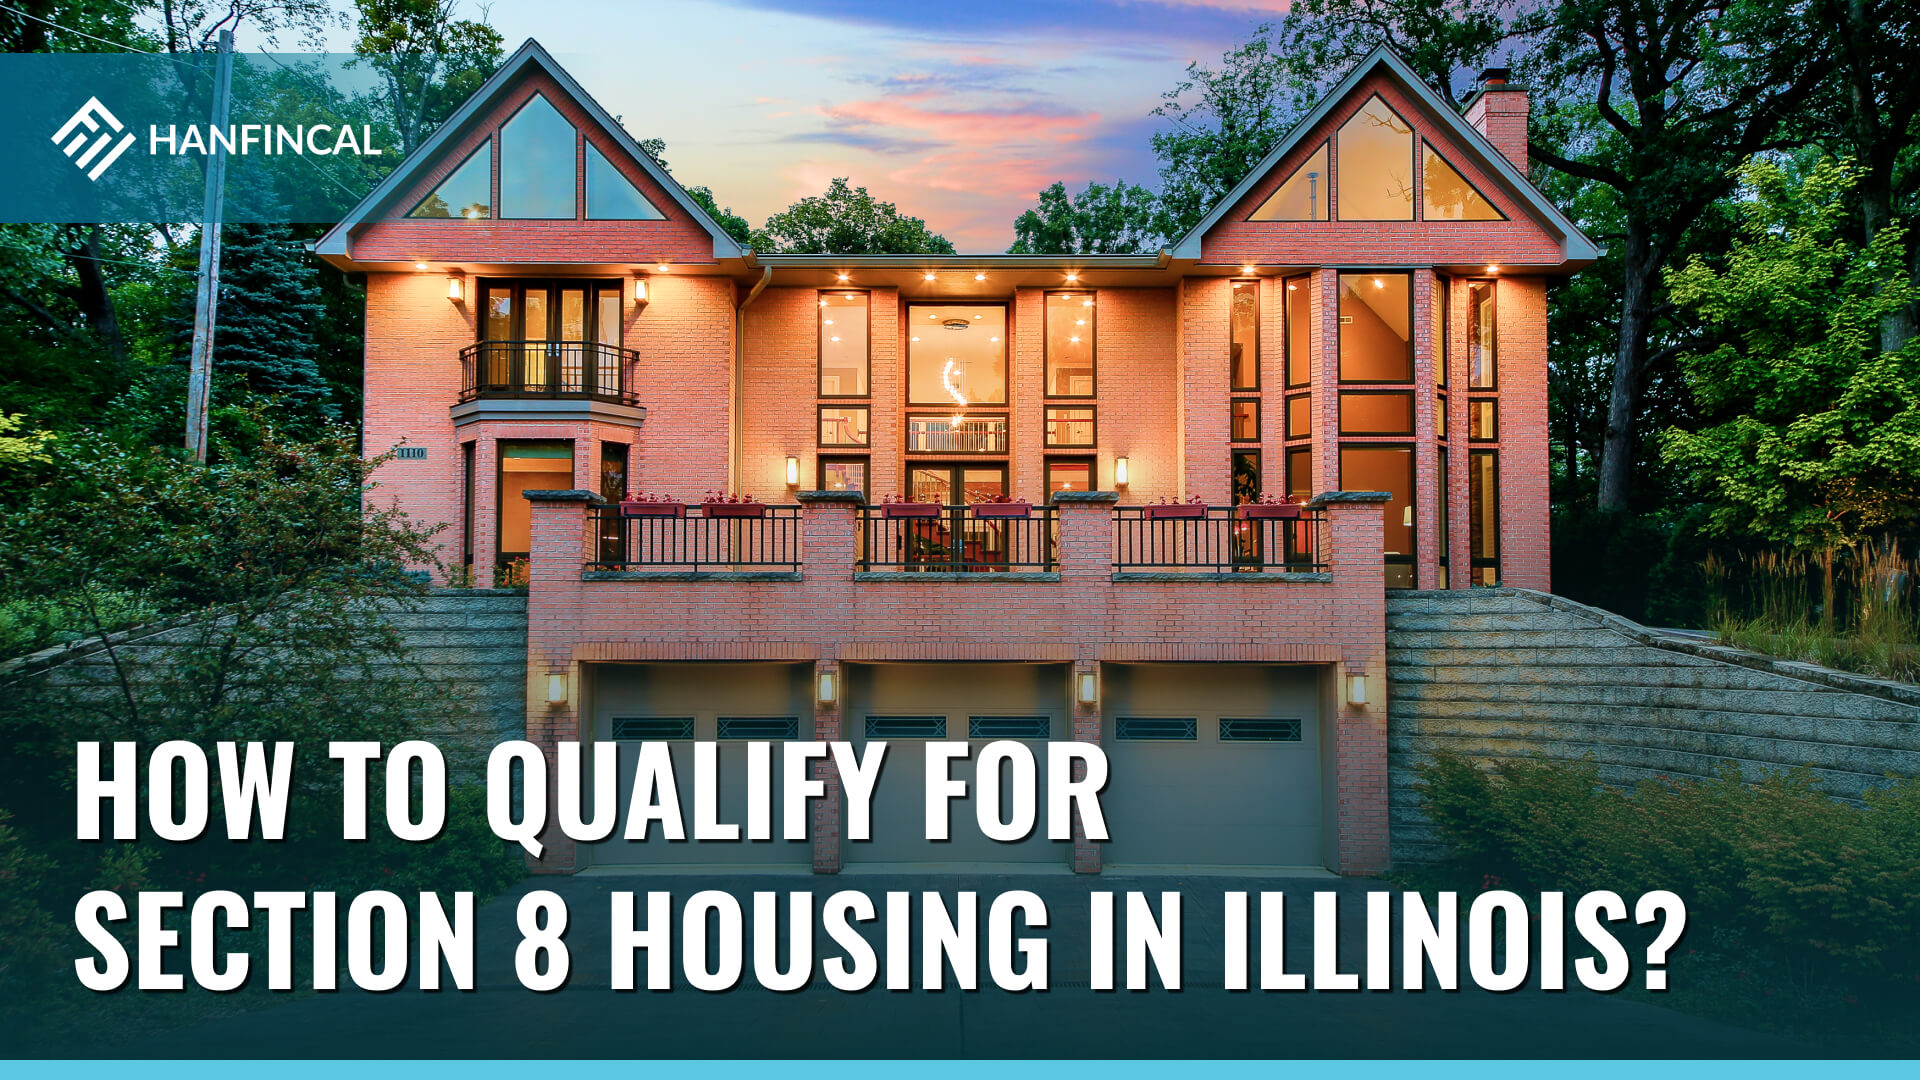 How To Qualify For Section 8 Housing In Illinois?